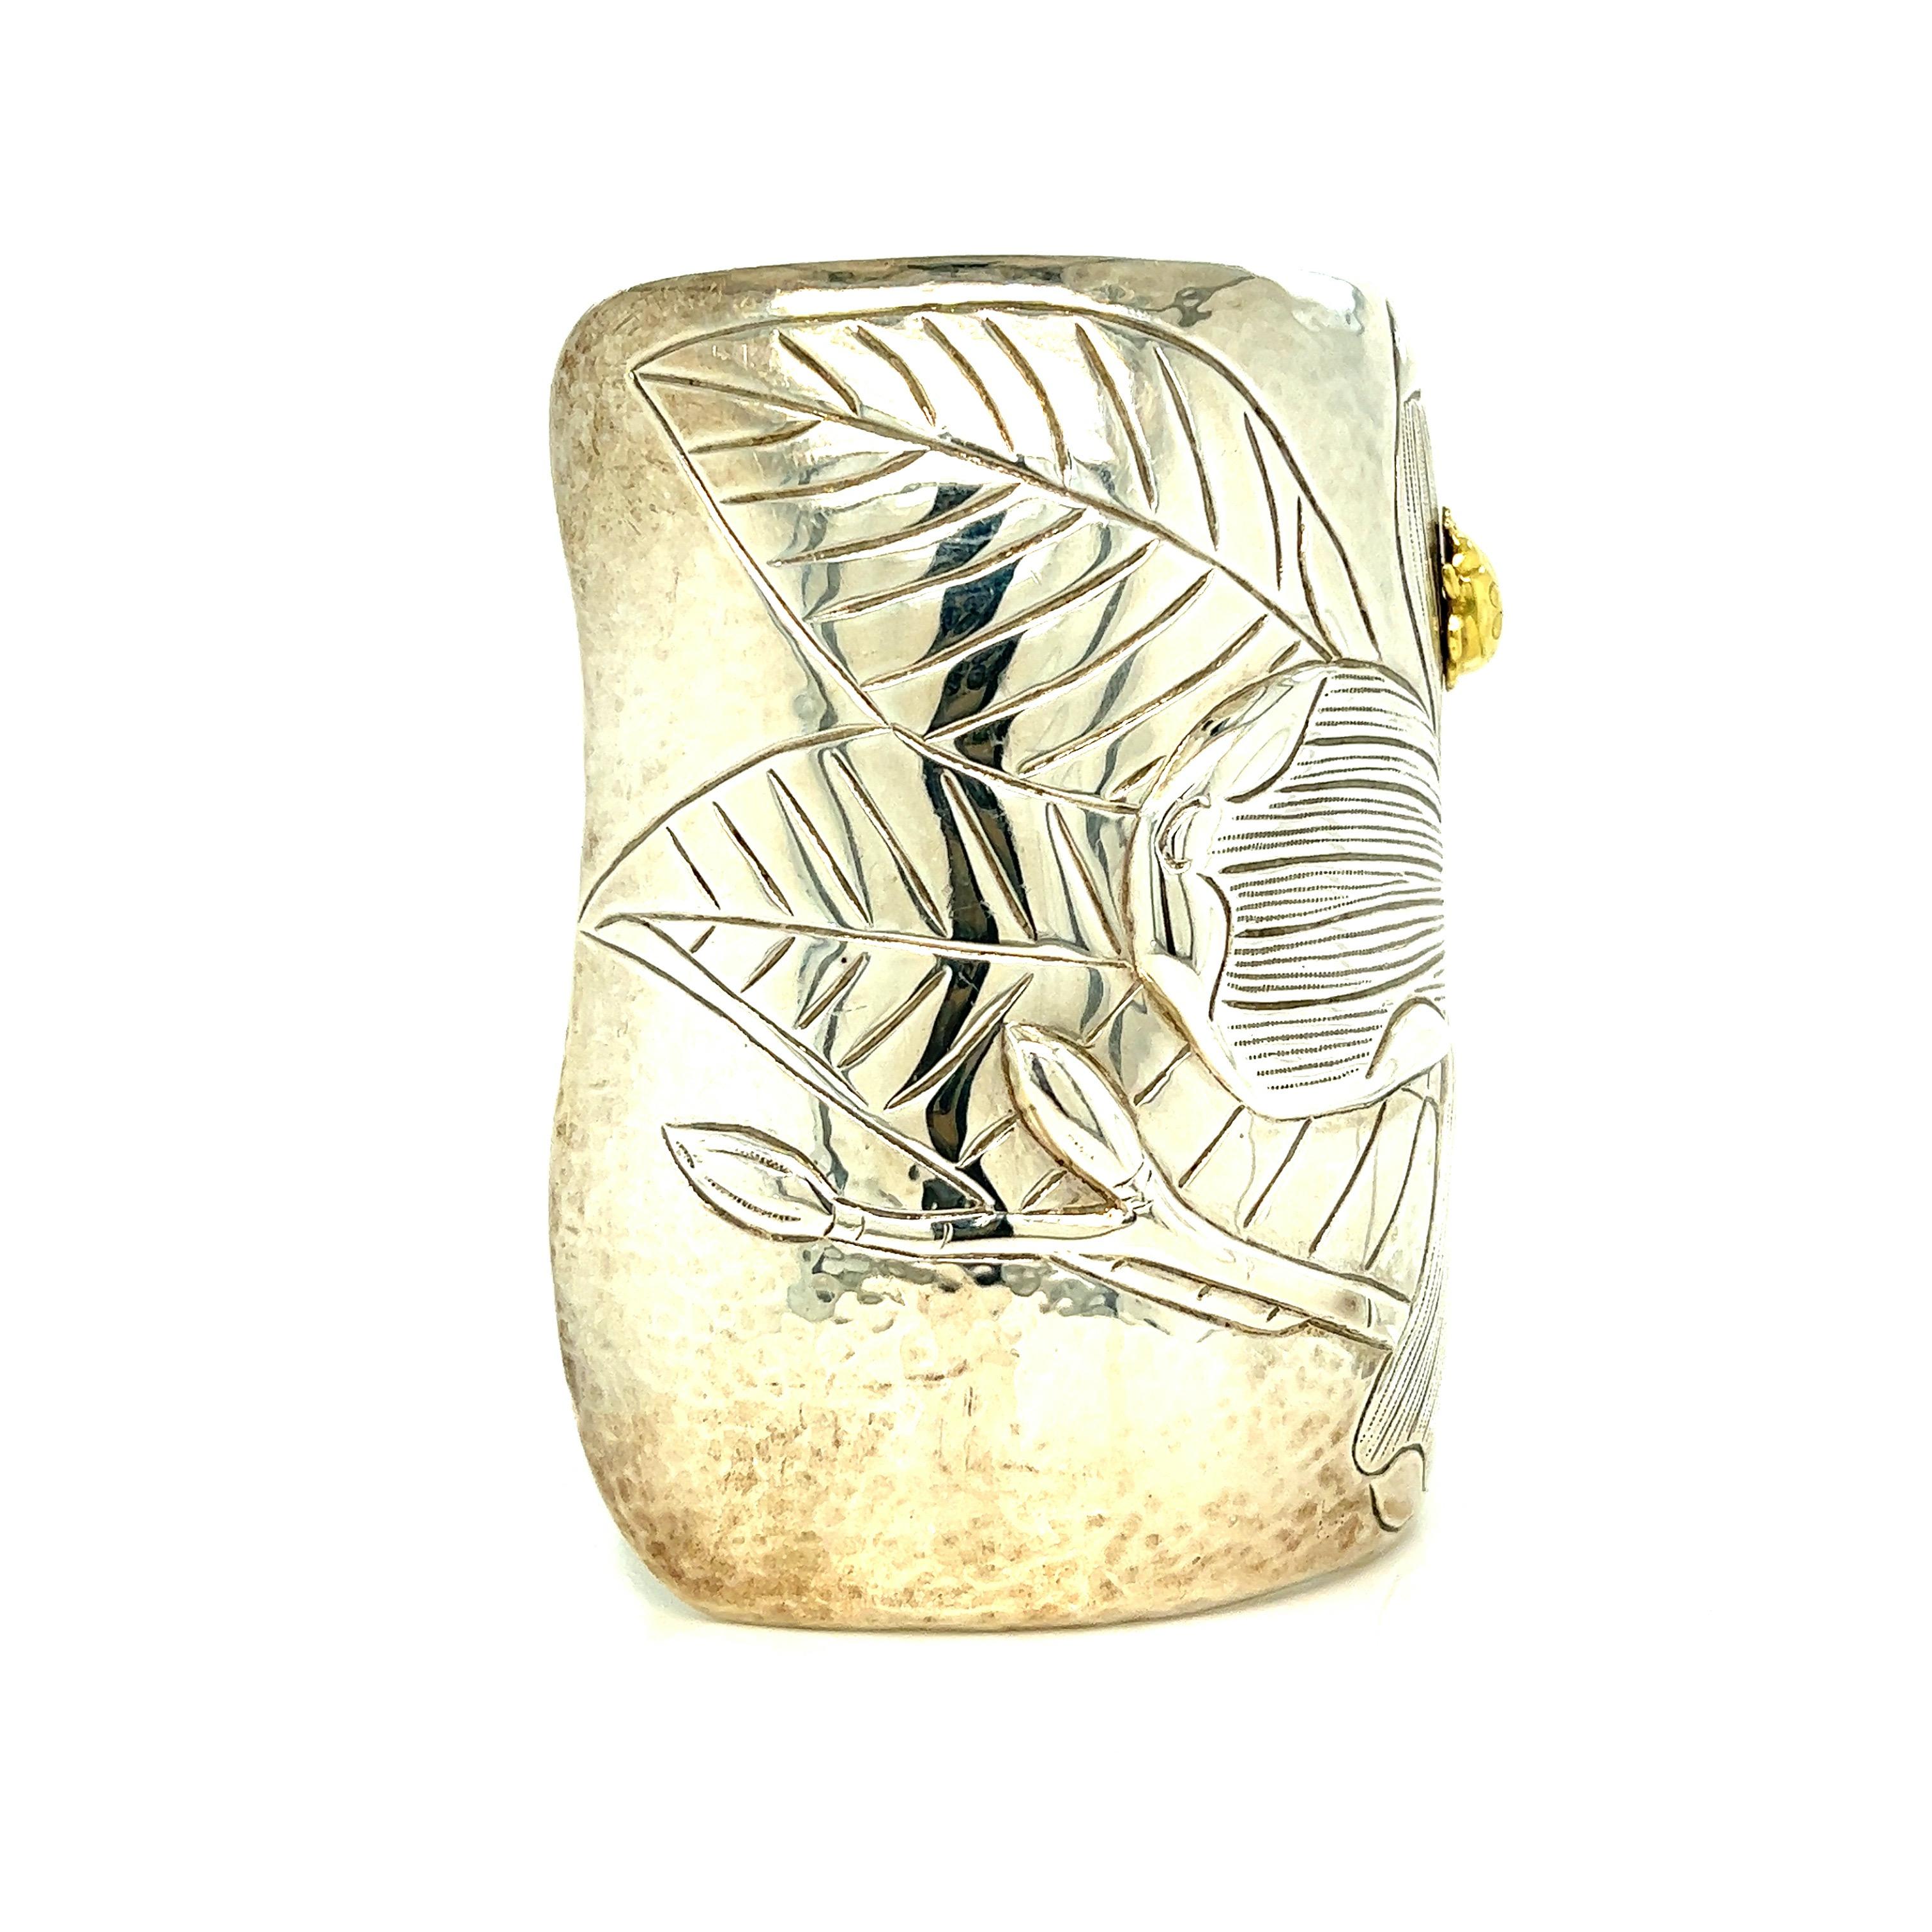 Tiffany & Co. magnolia and ladybug cuff bracelet

Large model, sterling silver and 18 karat yellow gold; marked 2000, Tiffany & Co., 925, 750

Size: width 3 inches, inner circumference 7 inches
Total weight: 178.1 grams 